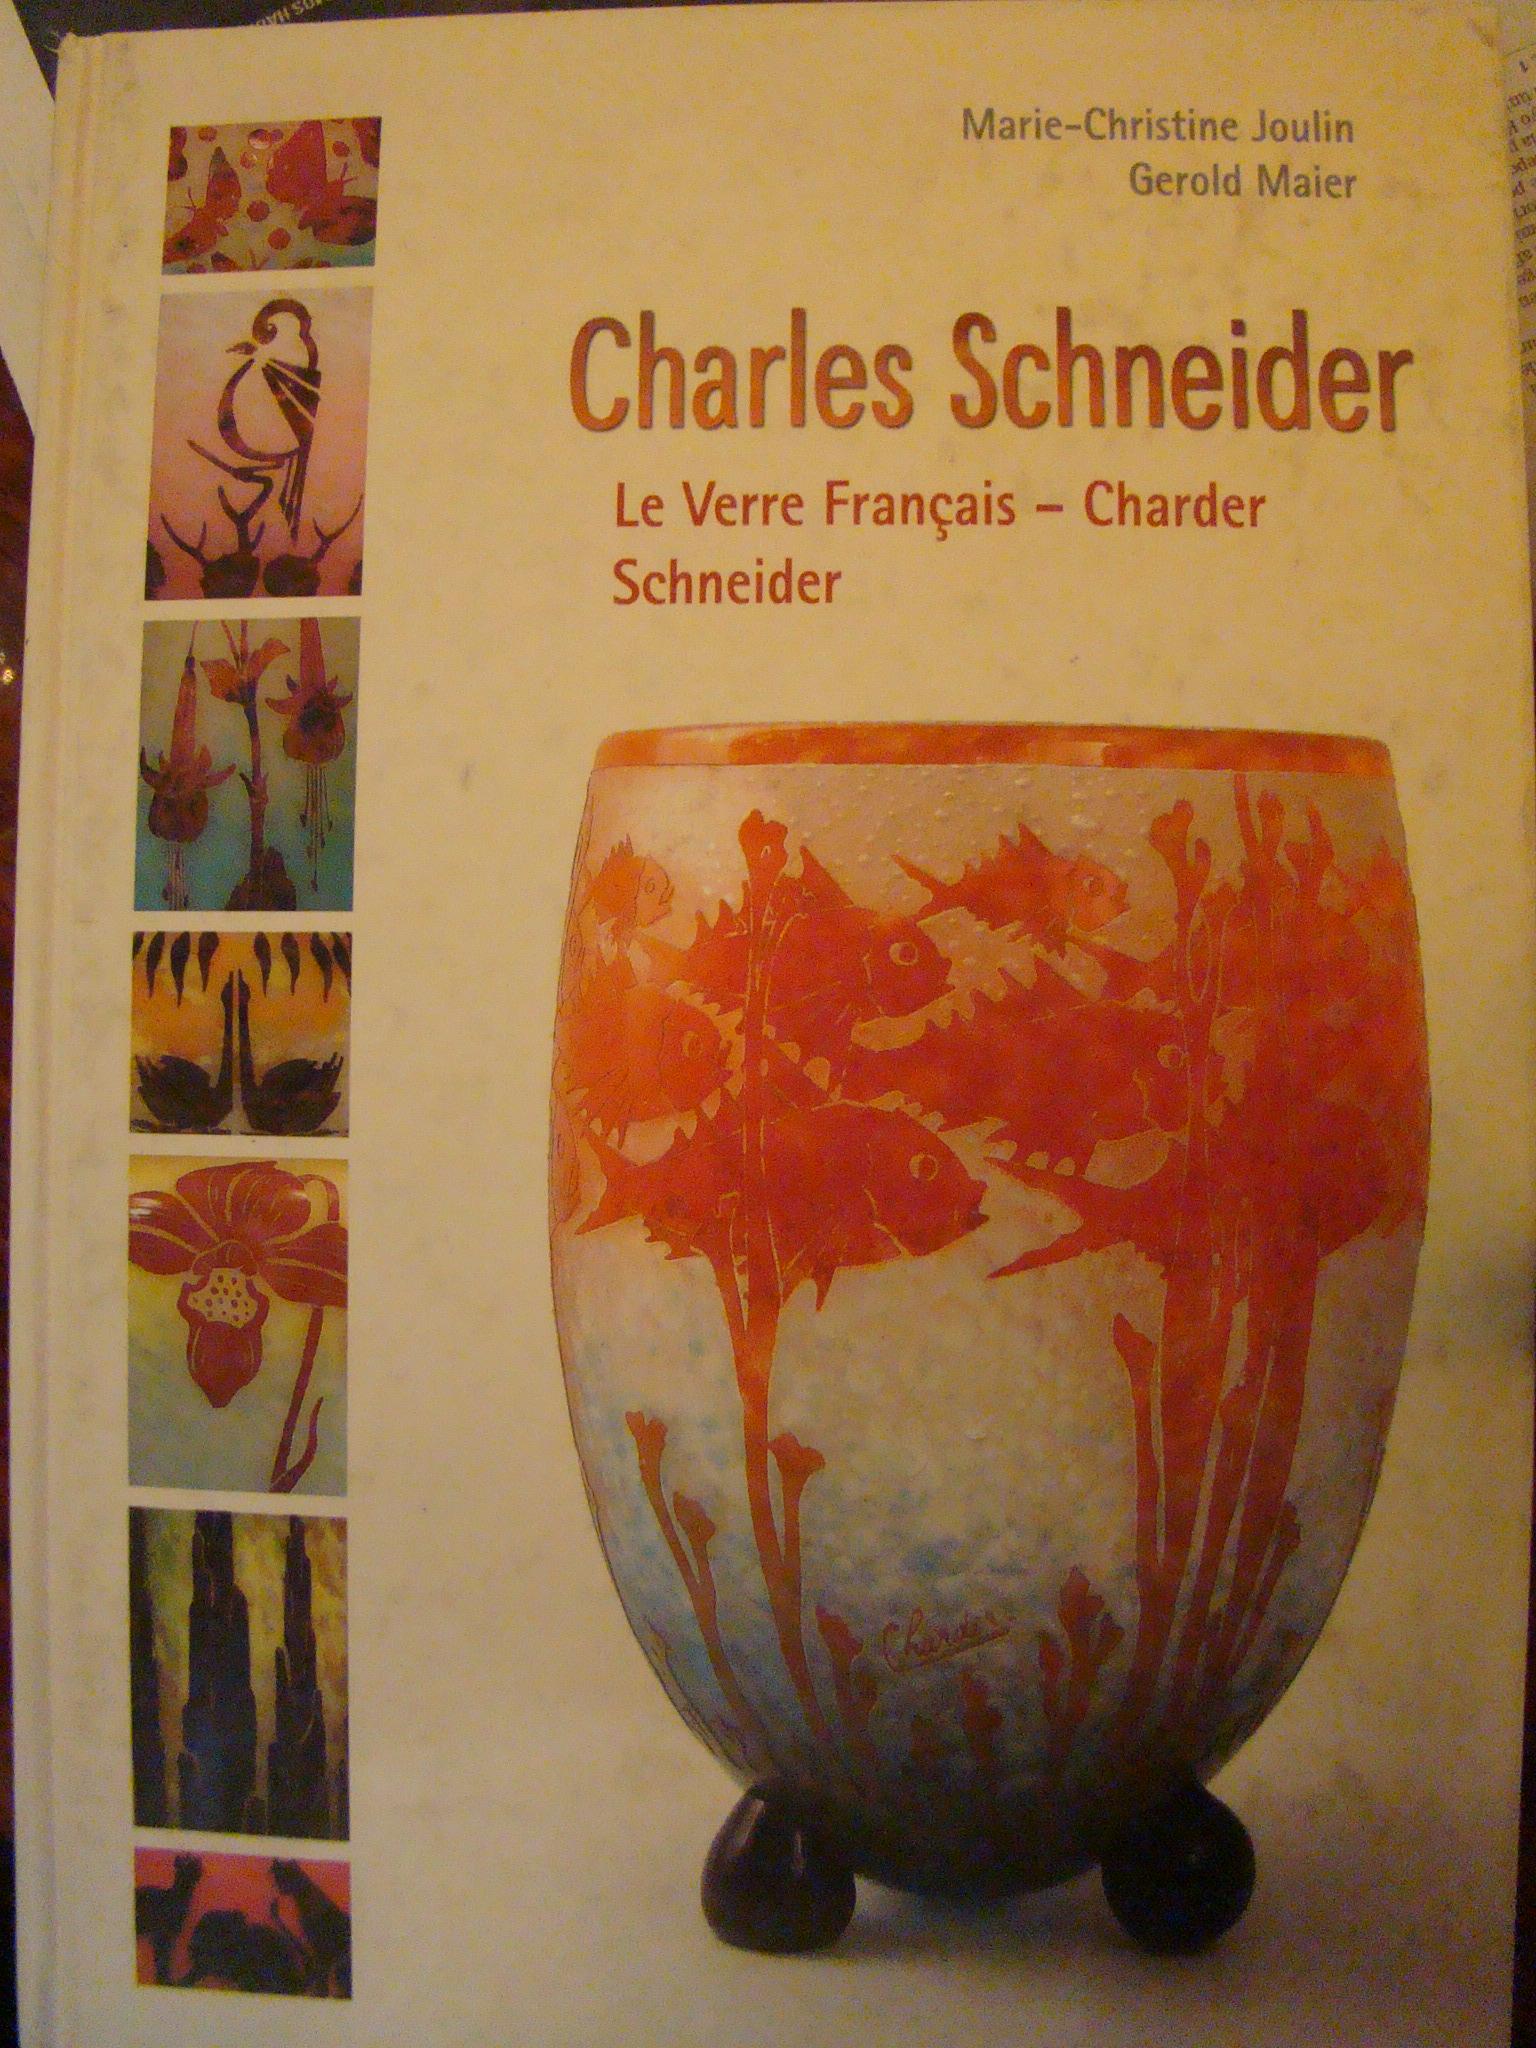 Vase Sign: Schneider France
Schneider
Charles Schneider (1881-1953) studied art in two of most prestigious French school of the Arts. First in the School of Fine Arts in Nancy, then in the elite Ecole des Beaux Arts in Paris. While at Nancy, Charles